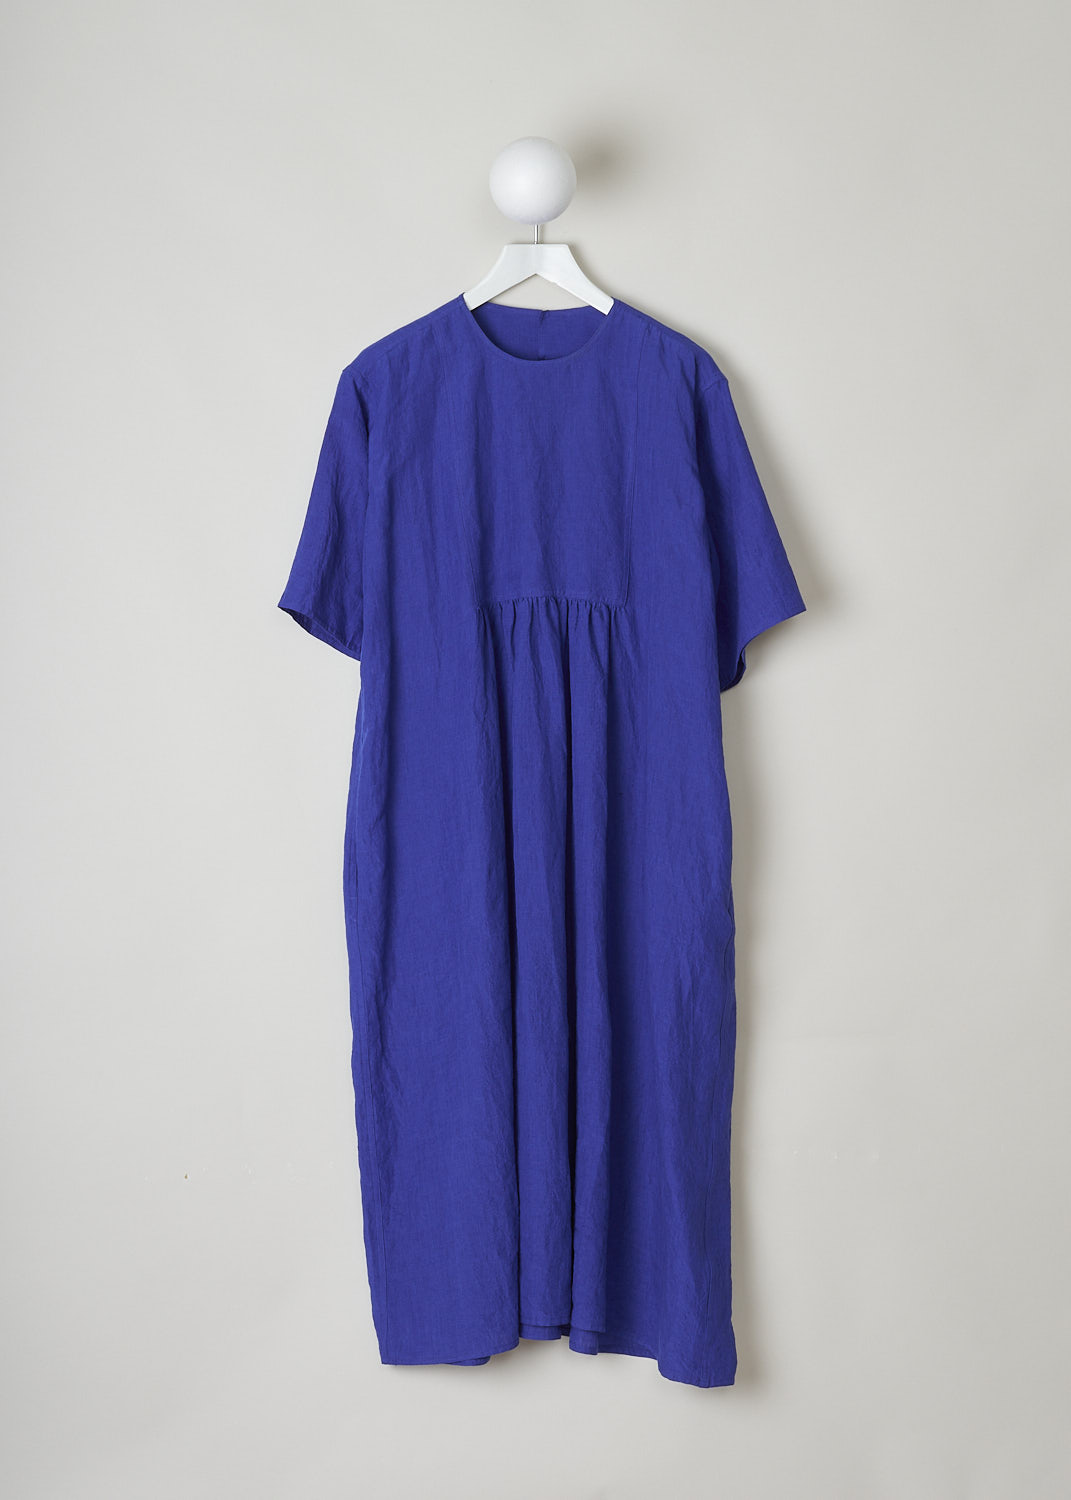 SOFIE D’HOORE, ROYAL BLUE LINEN DARNELLE DRESS, DARNELLE_LIFE_TOUAREG, Blue, Front, This oversized royal blue midi dress features a round neckline, dropped shoulders and short sleeves. The A-line dress has a square bib-like front with pleated details below. Concealed in the side seams, slanted pockets can be found. The dress has a straight hemline with slits on either side. 

